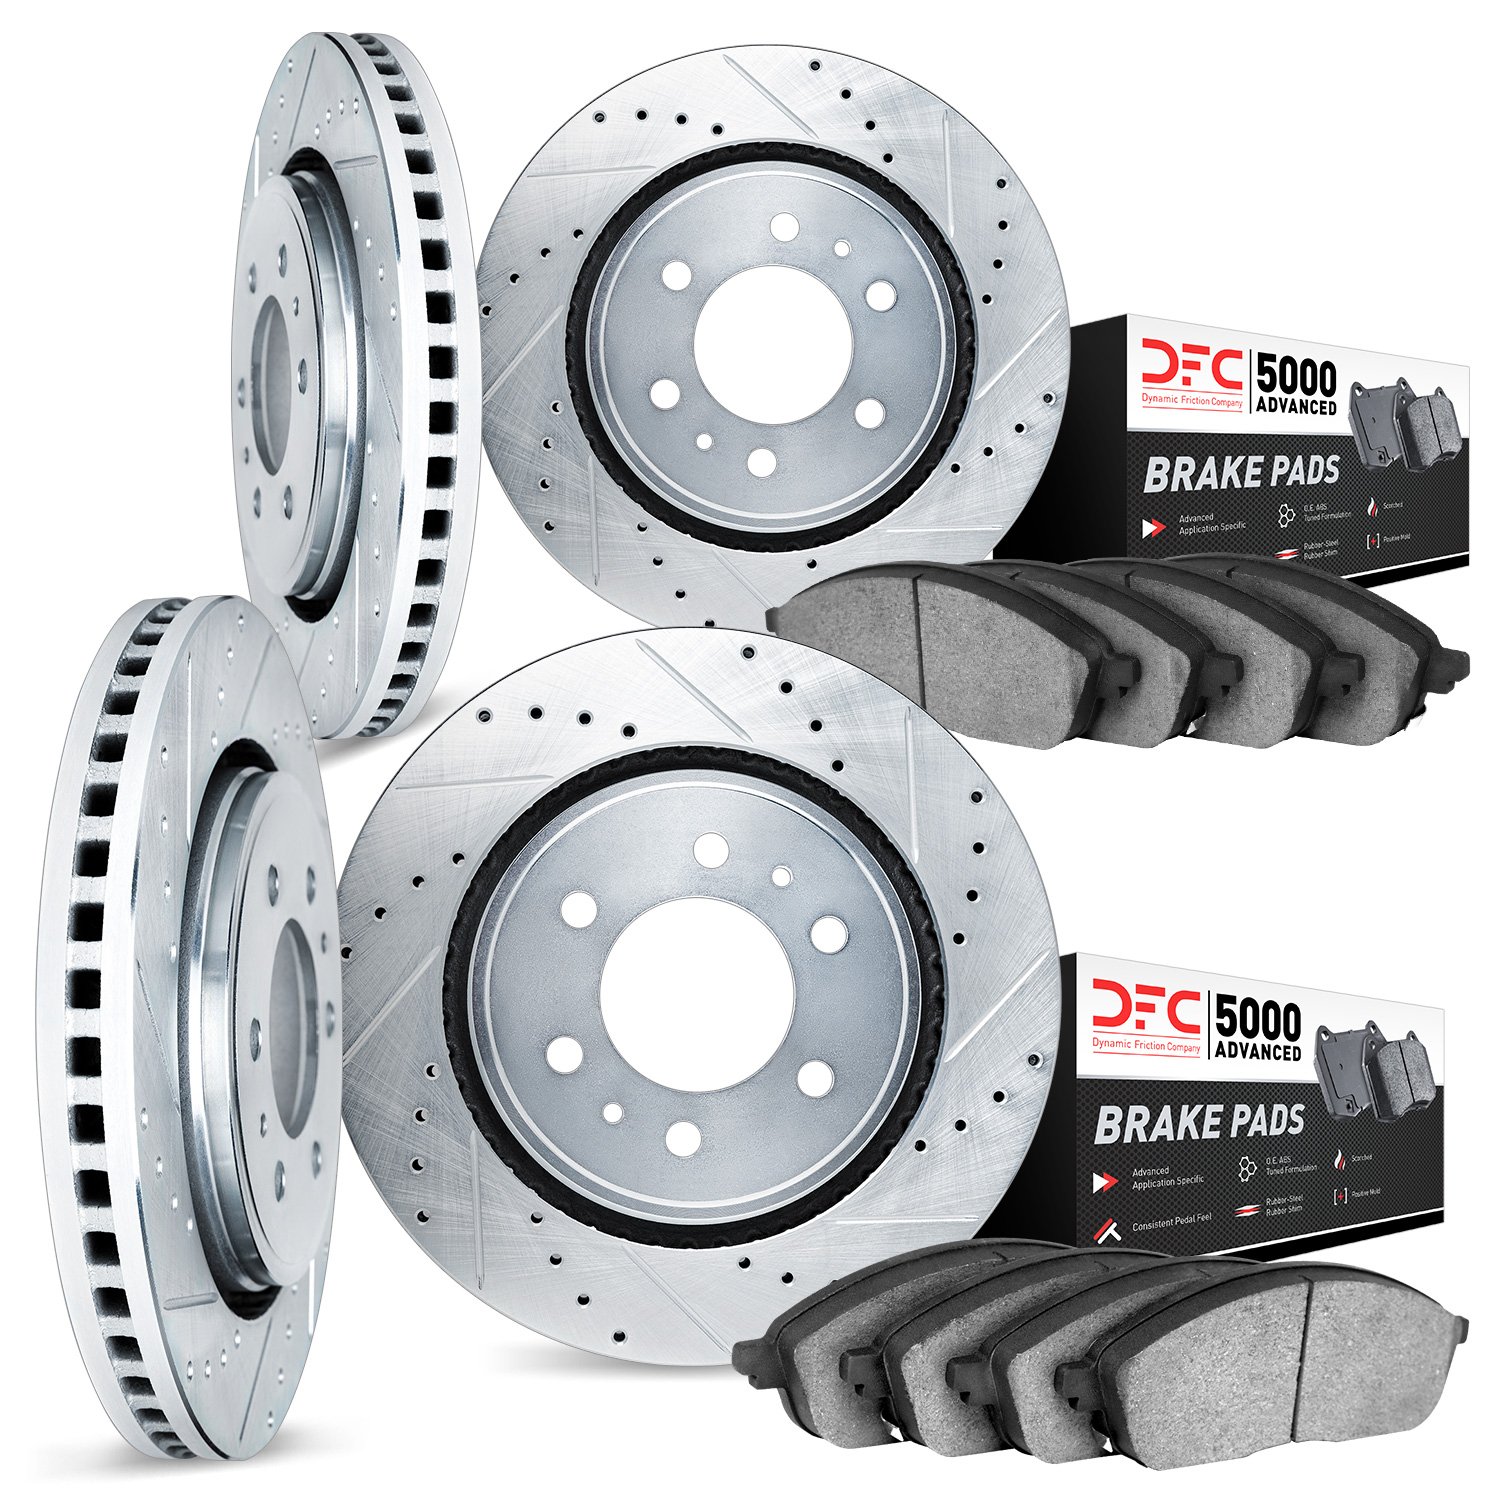 7504-48018 Drilled/Slotted Brake Rotors w/5000 Advanced Brake Pads Kit [Silver], 1999-2007 GM, Position: Front and Rear